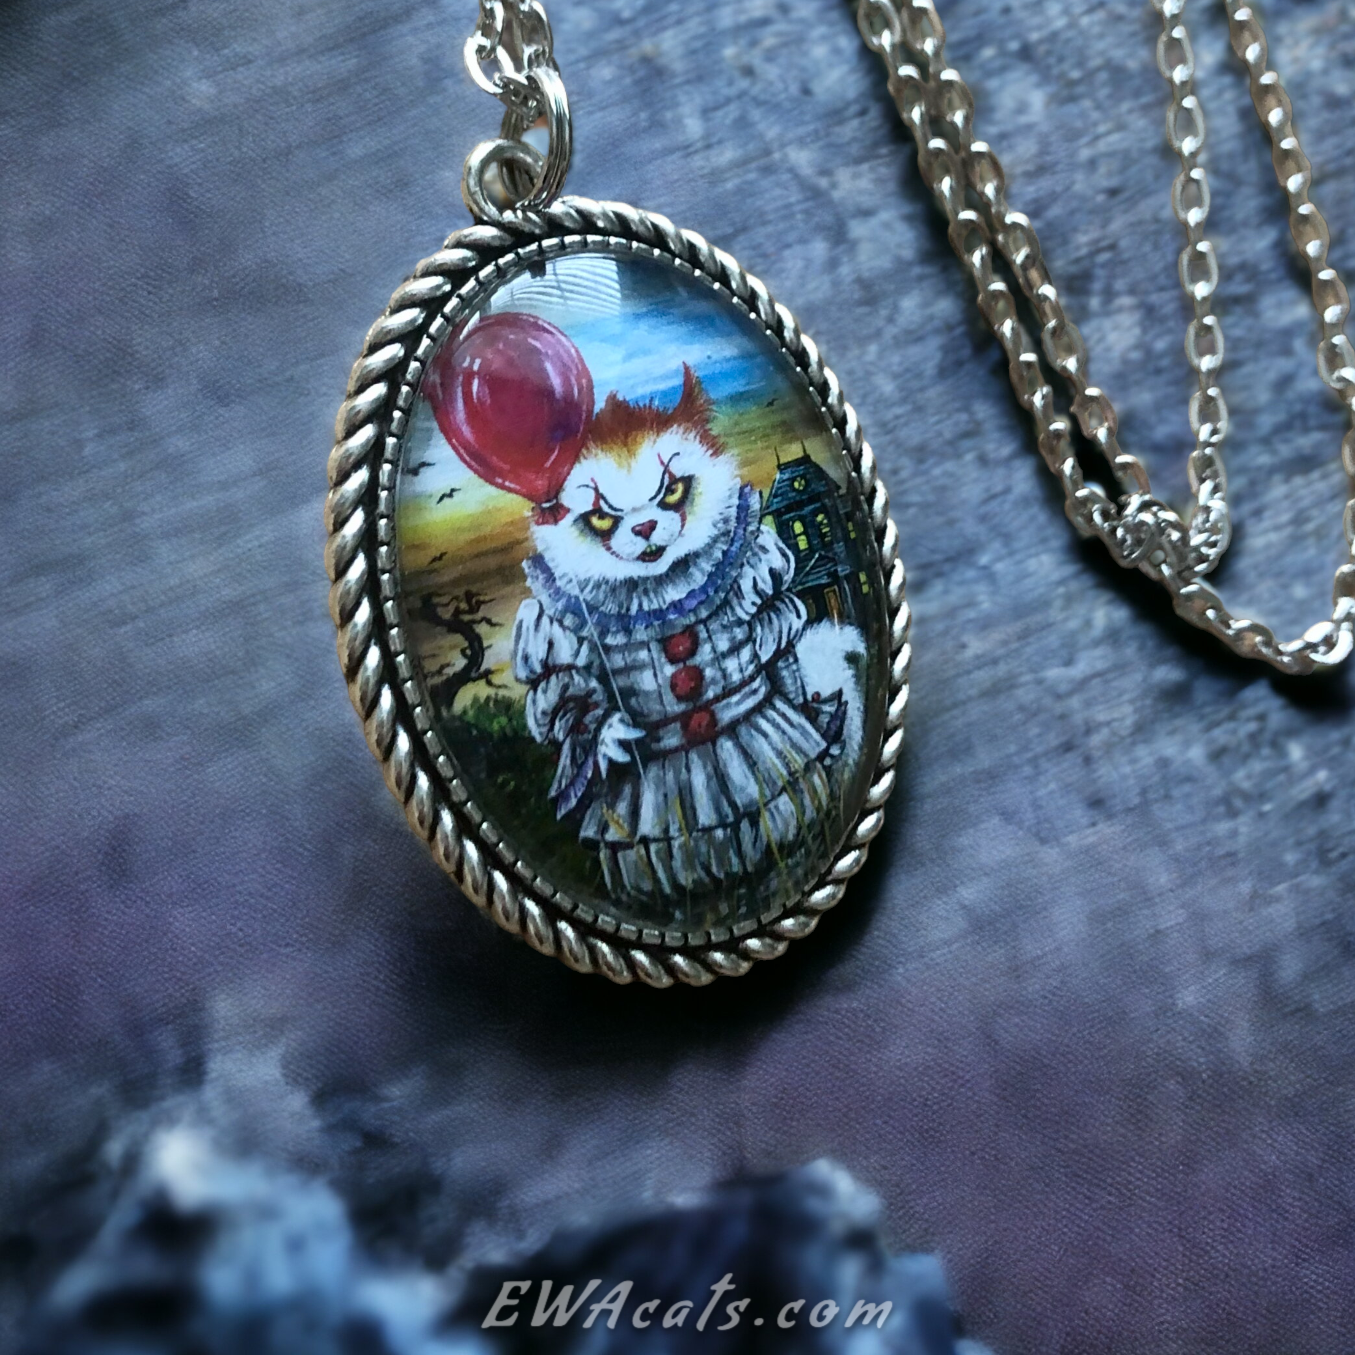 Necklace "KittyWise the Purring Clown"